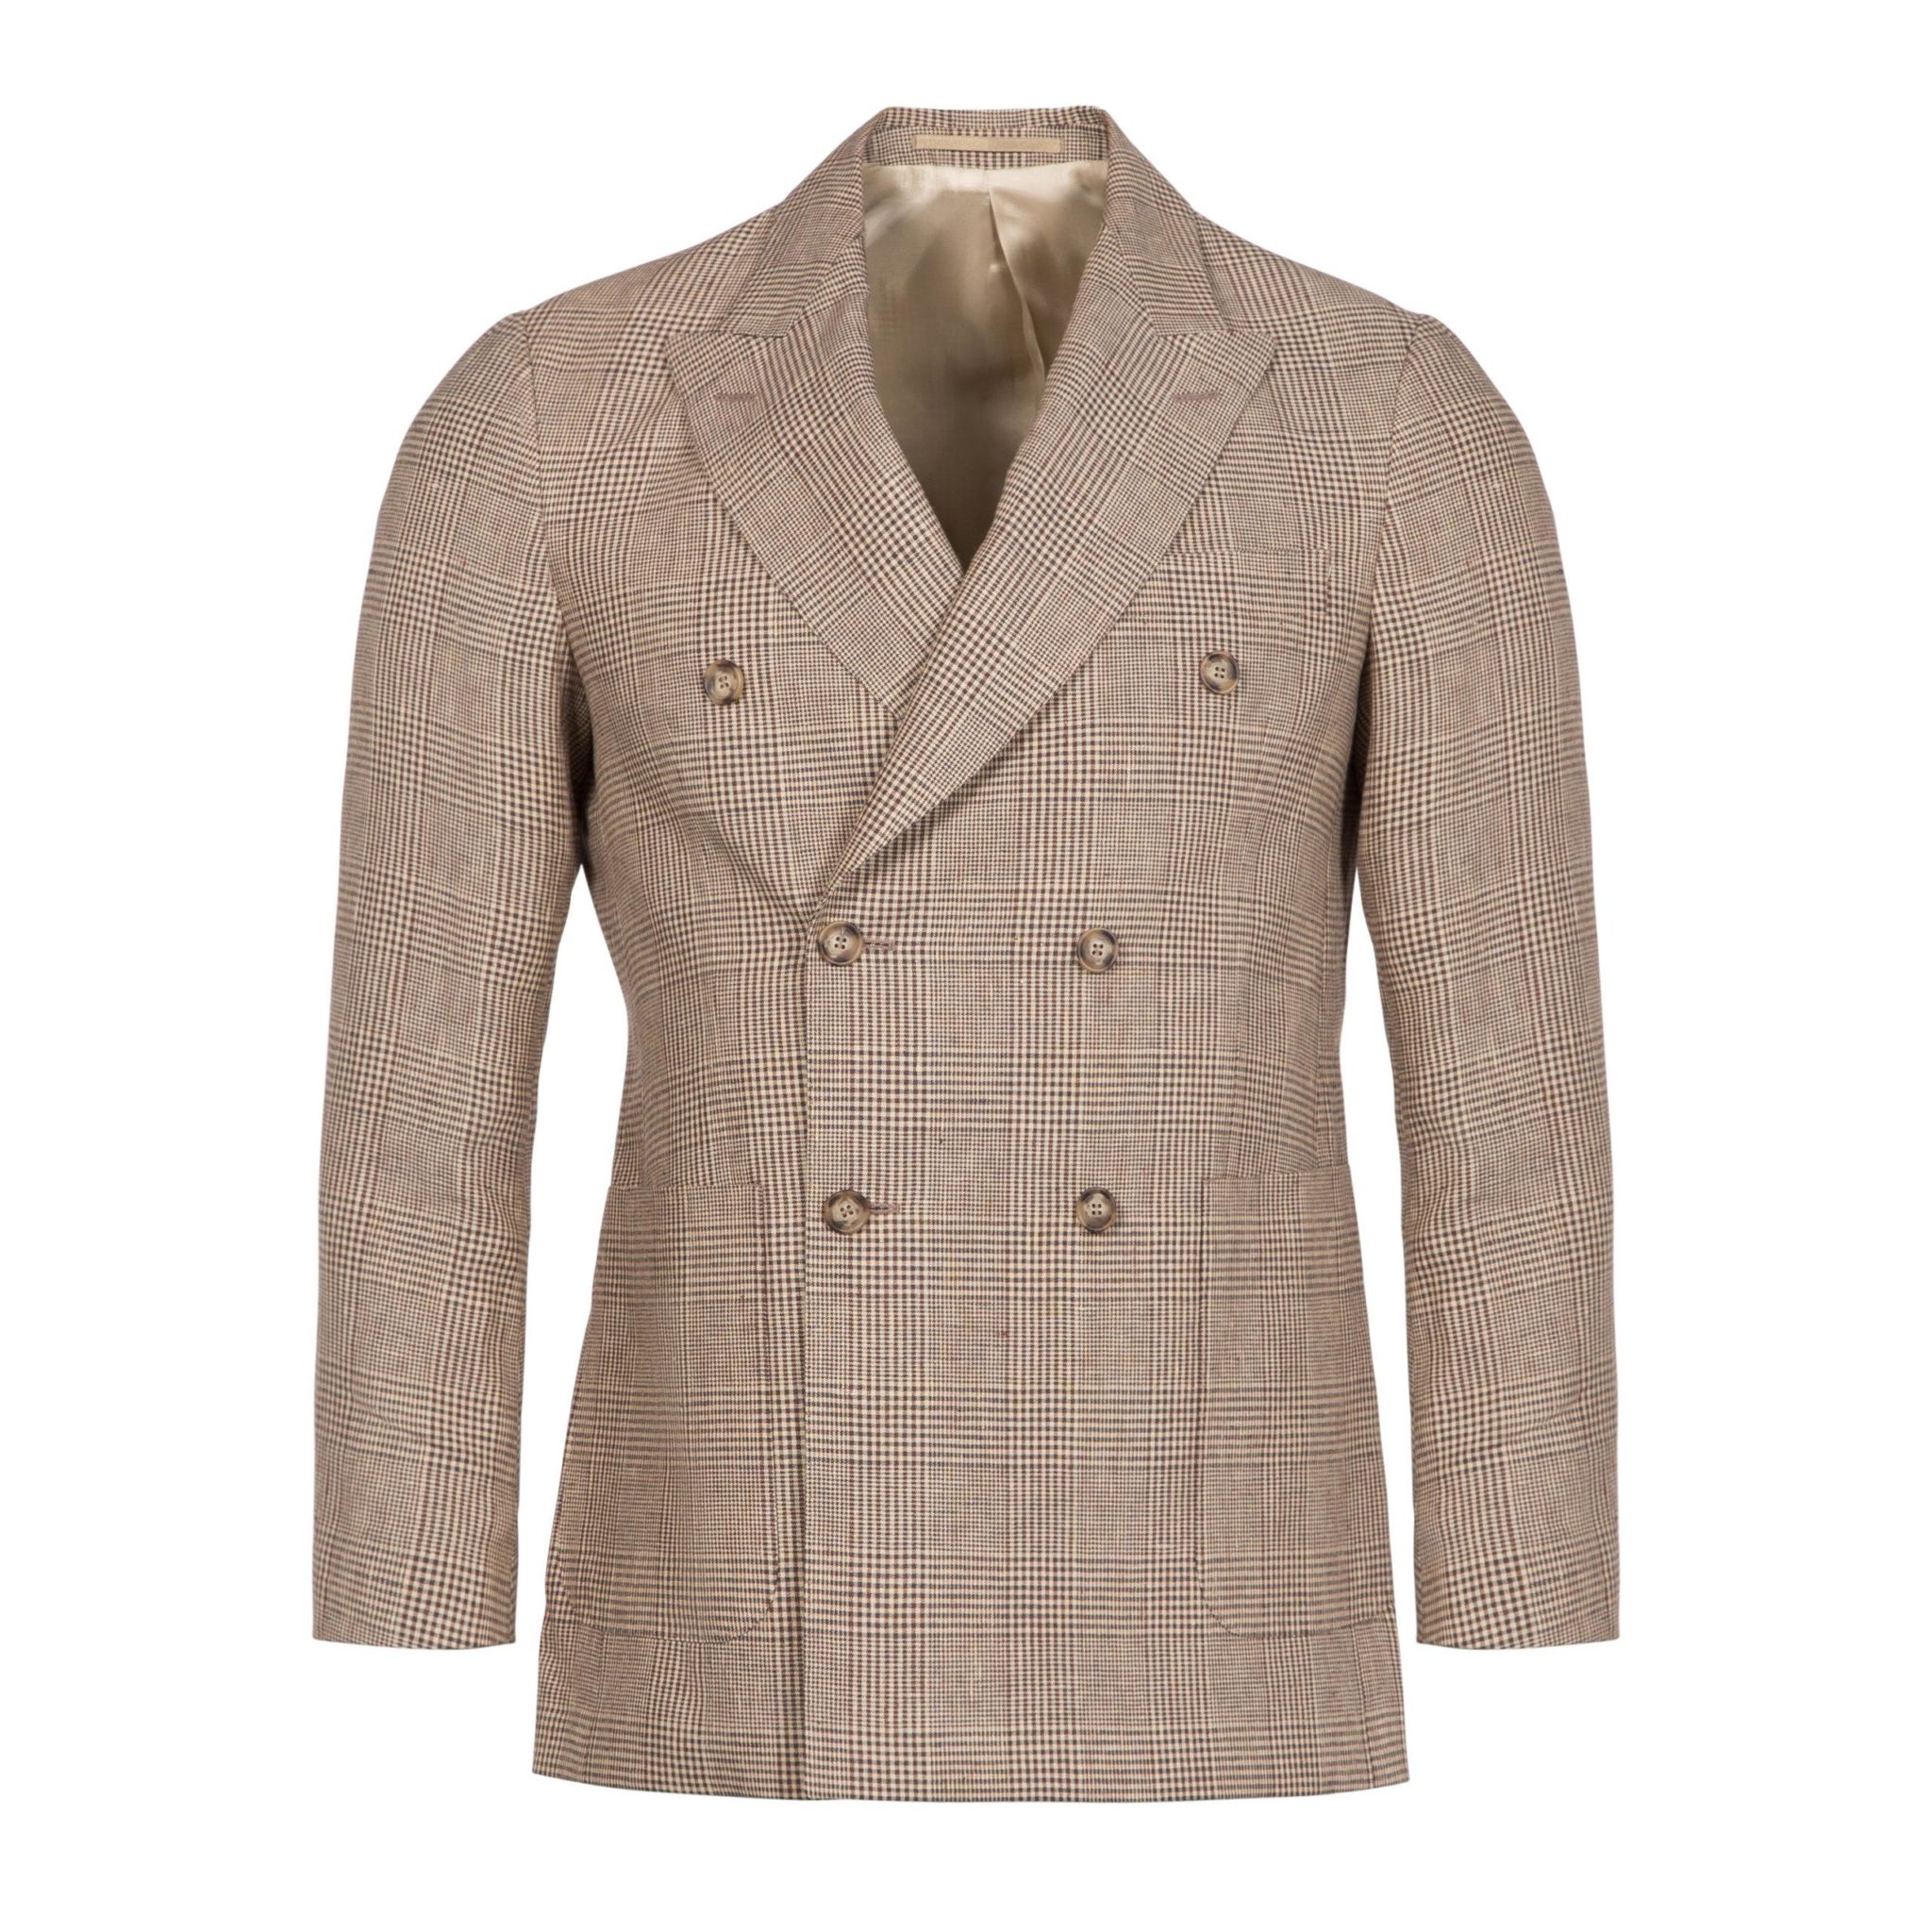 Ivory and Brown Linen Glencheck Double Breasted Blazer